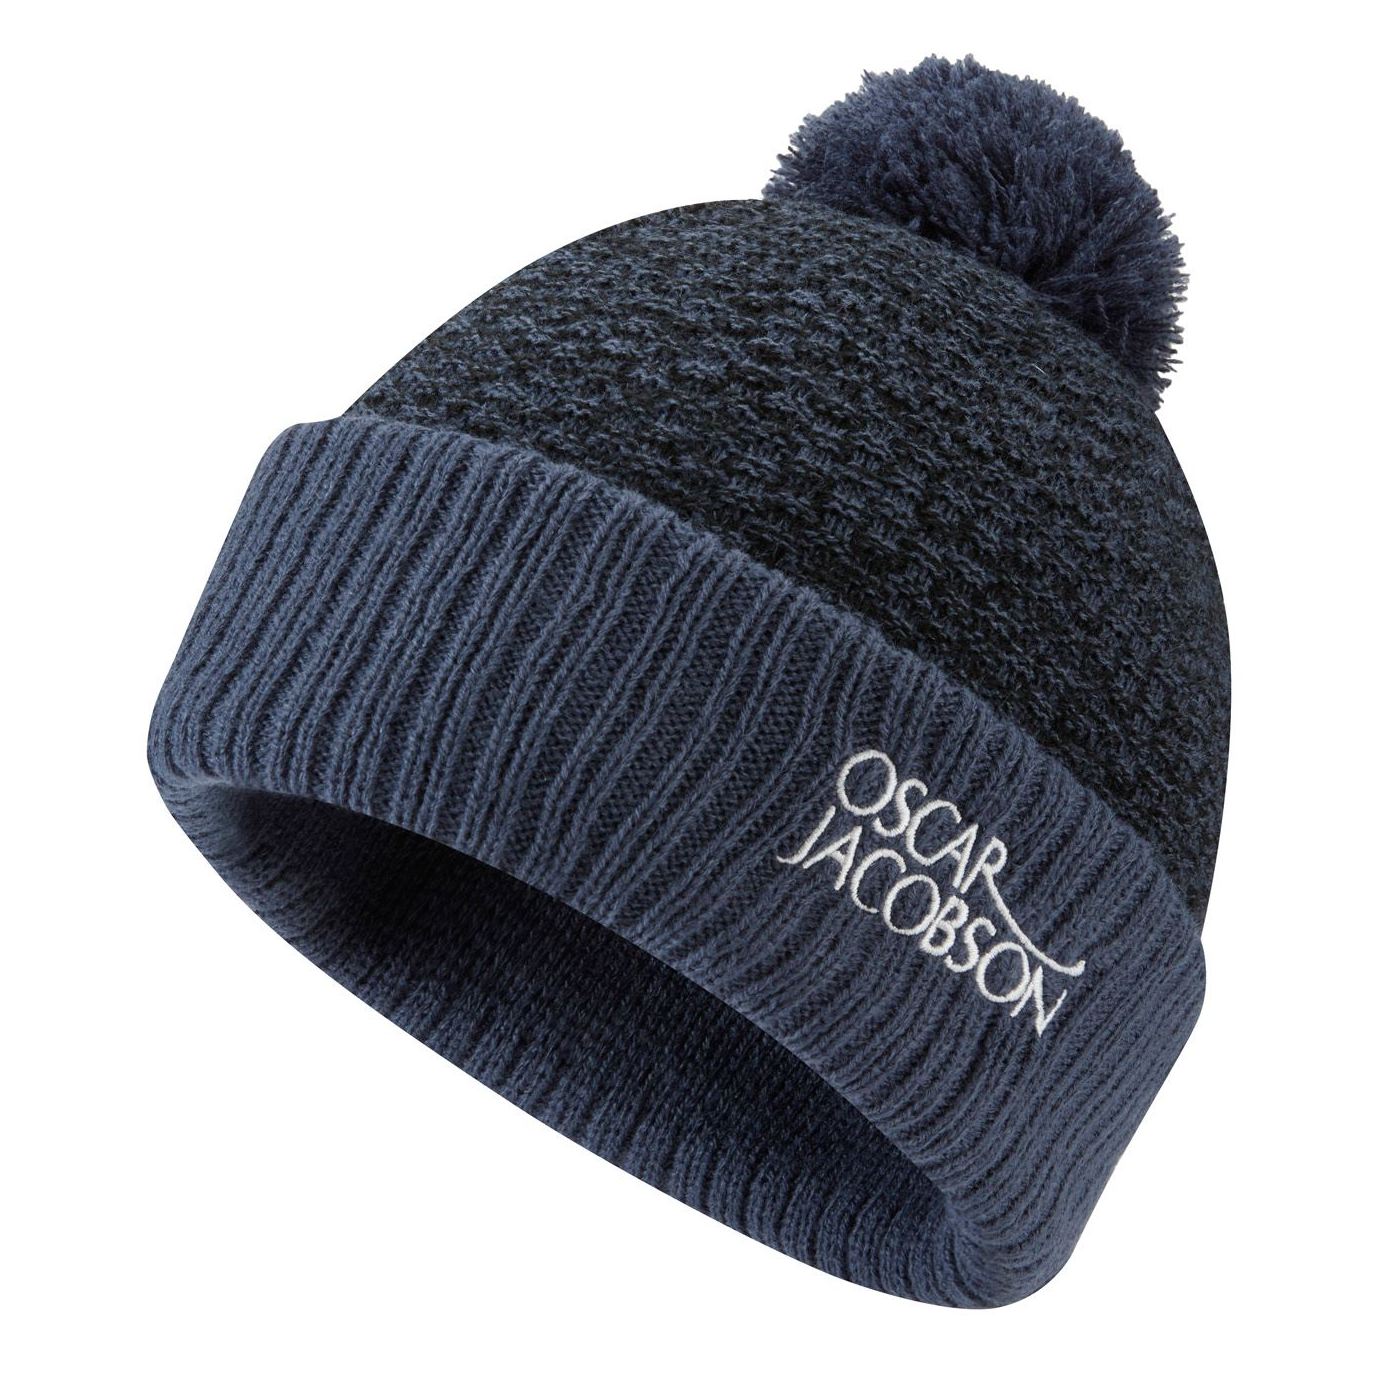 Oscar Jacobson Tammis Knitted Golf Bobble Hat